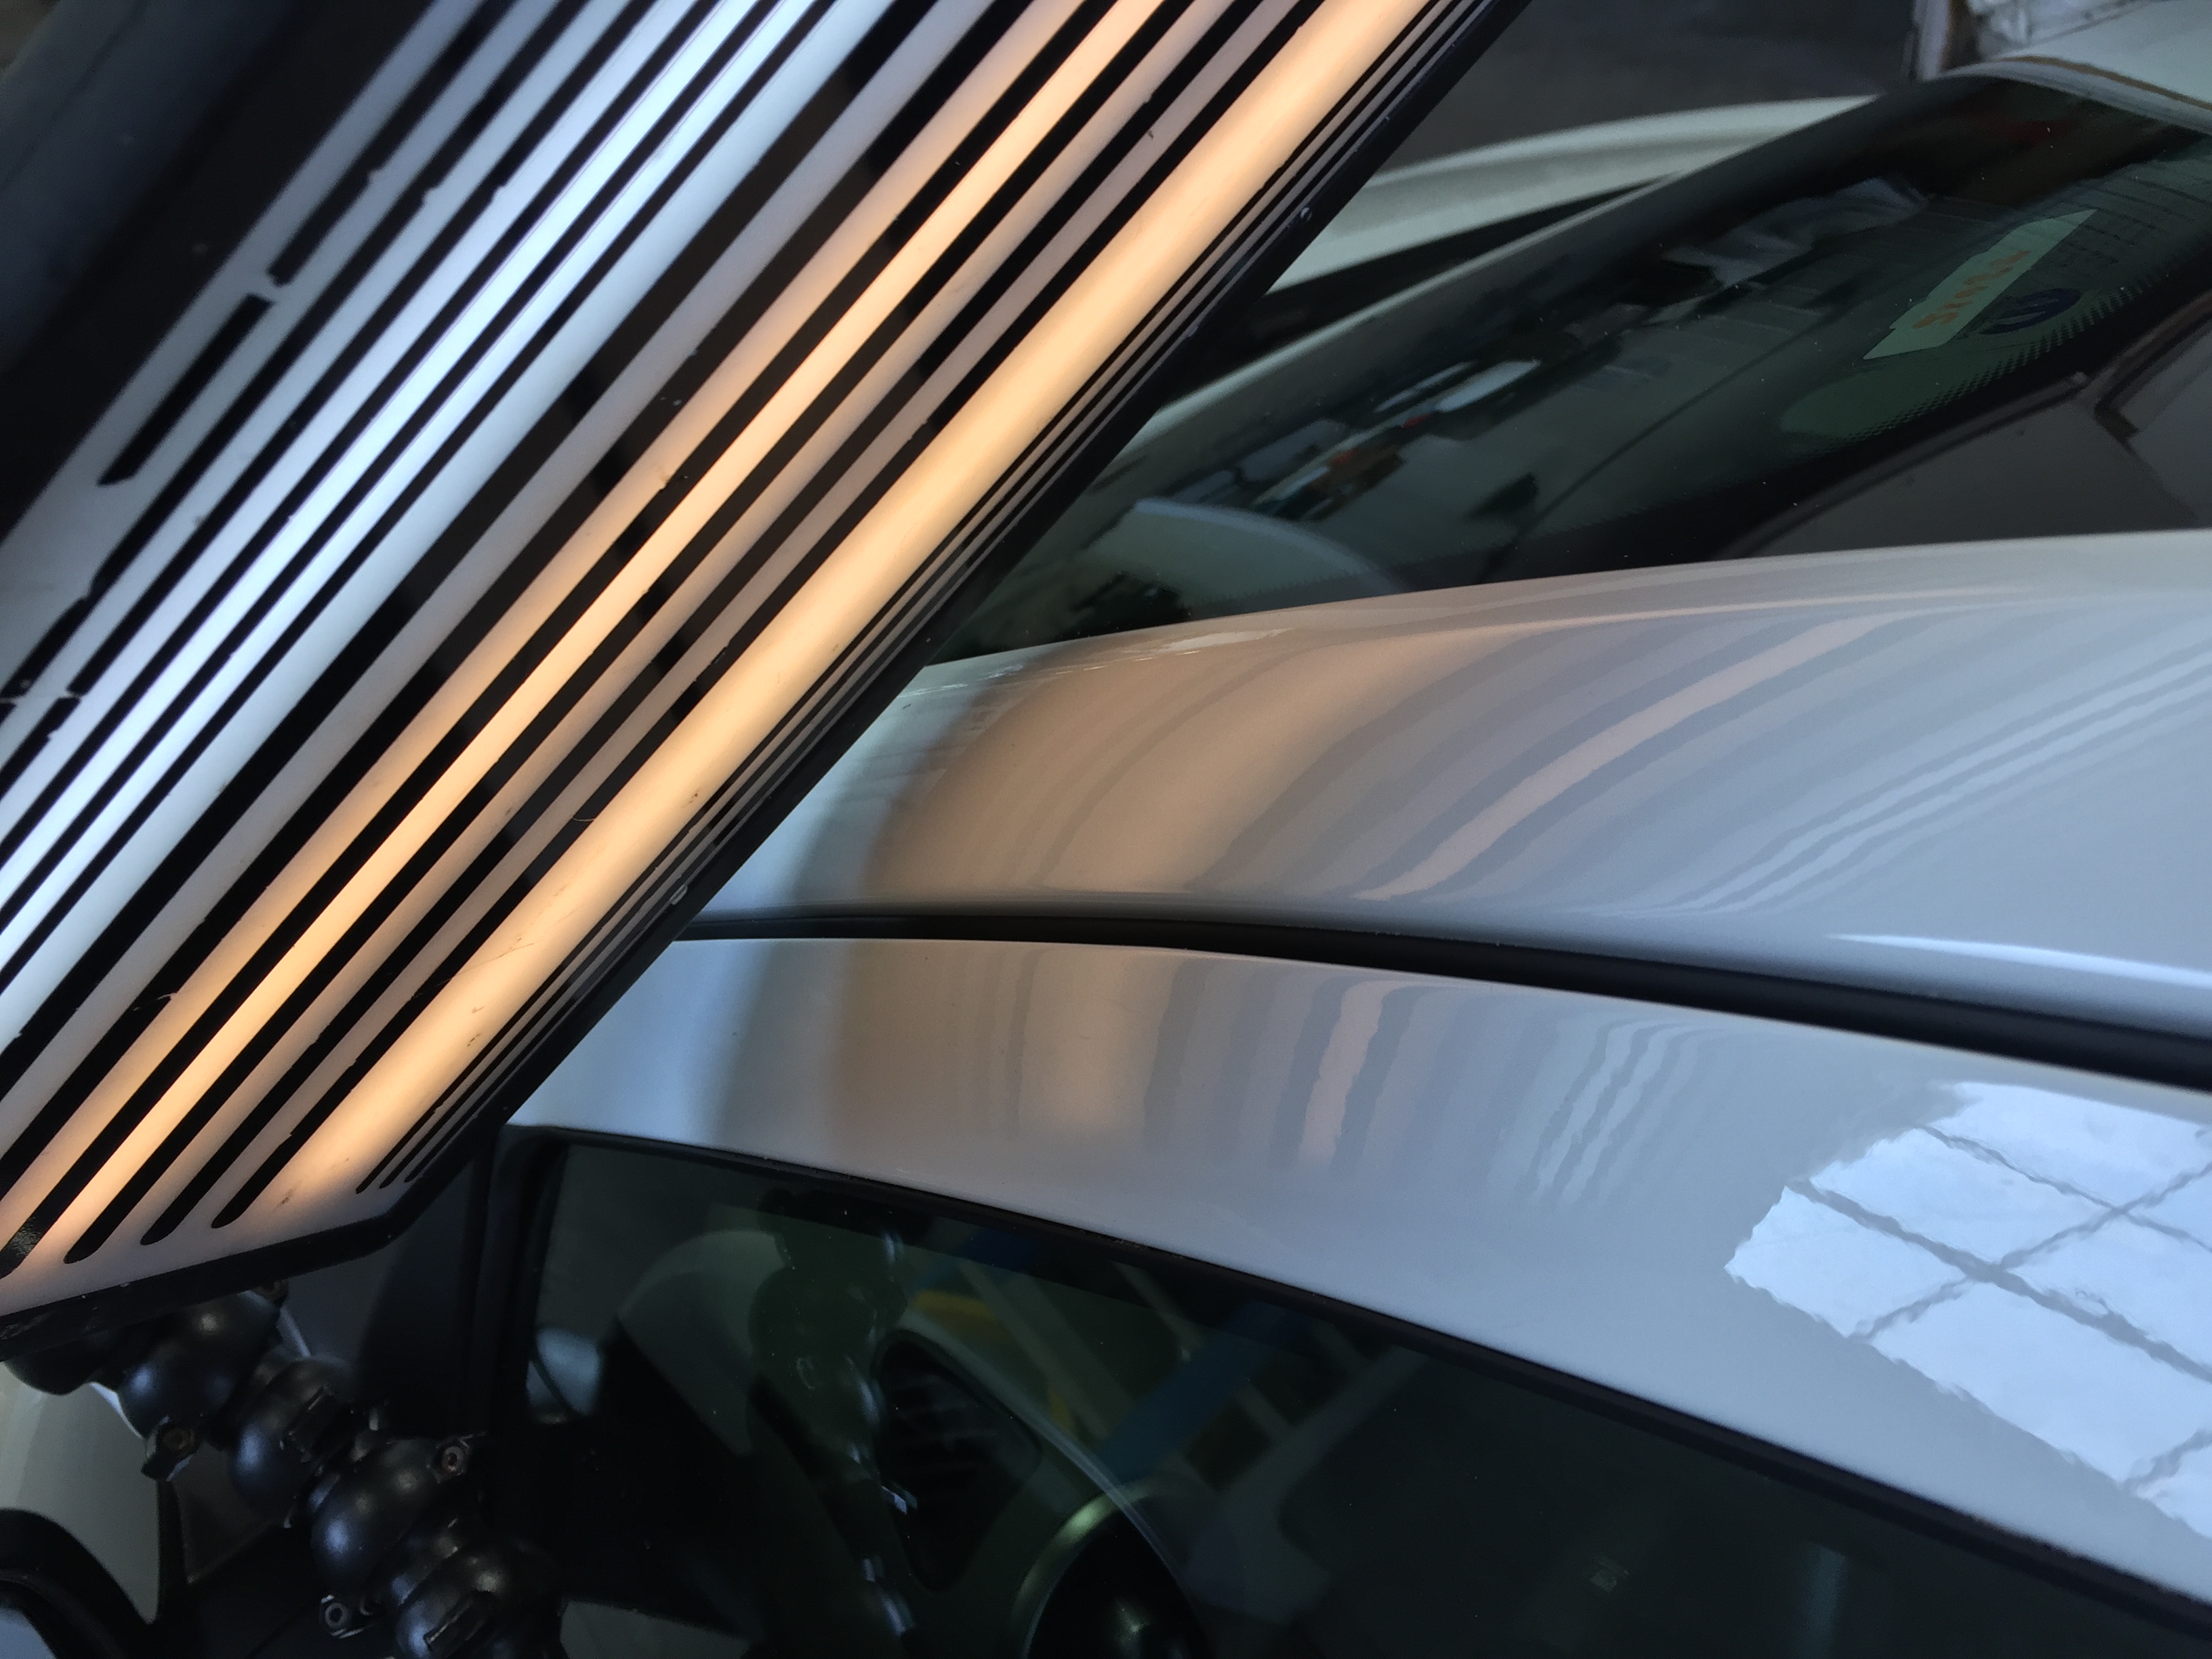 2015 Chevy Sonic, Dent Removal on PIllar, Images, Hail Damage, Paintless Dent Removal, Springfield, IL, https://217dent.com2015 Chevy Sonic, Dent Removal on PIllar, Images, Hail Damage, Paintless Dent Removal, Springfield, IL, https://217dent.com